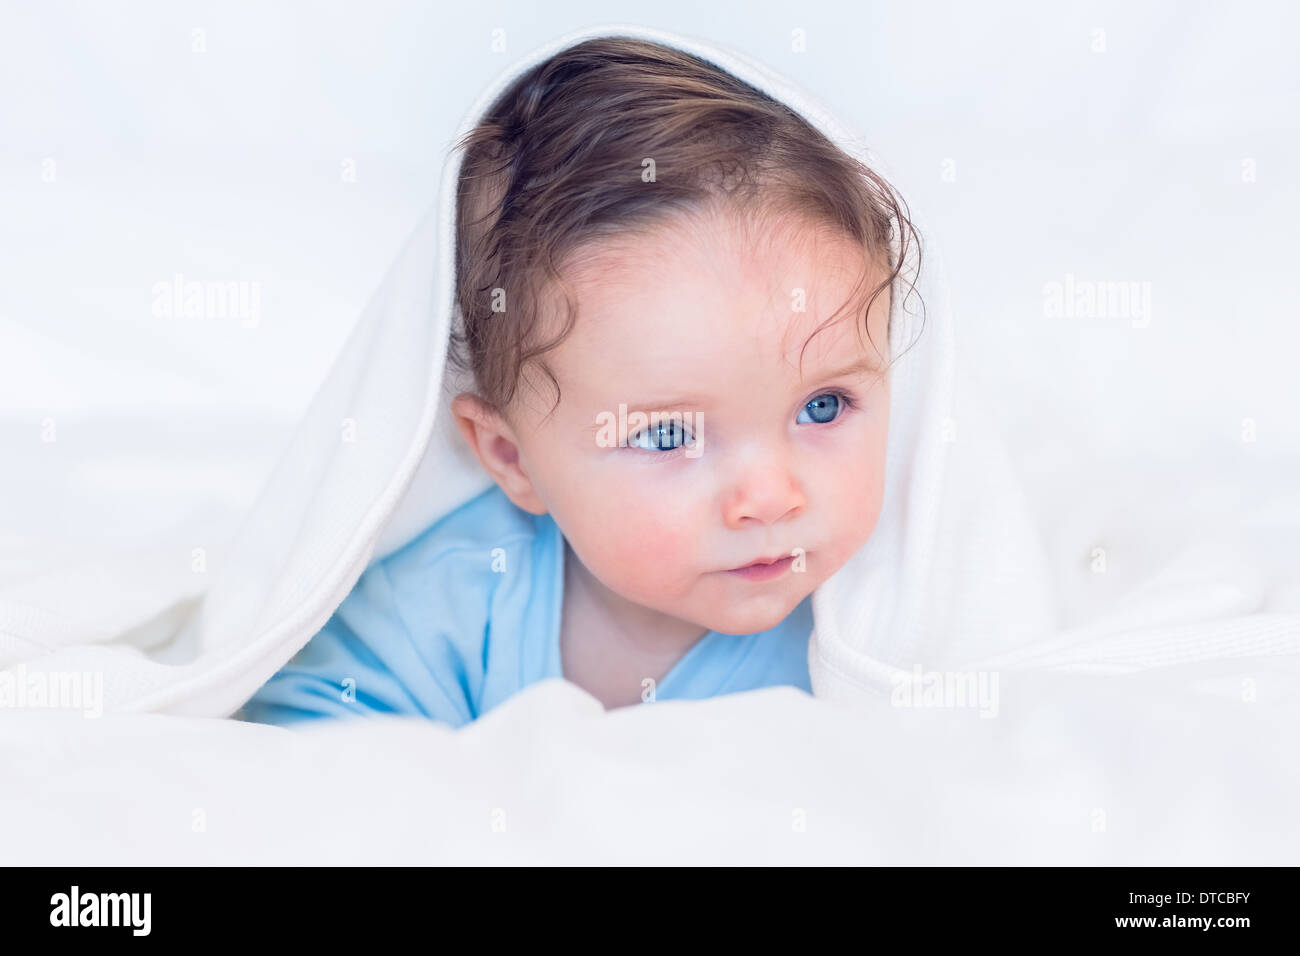 Baby covered in blanket Stock Photo